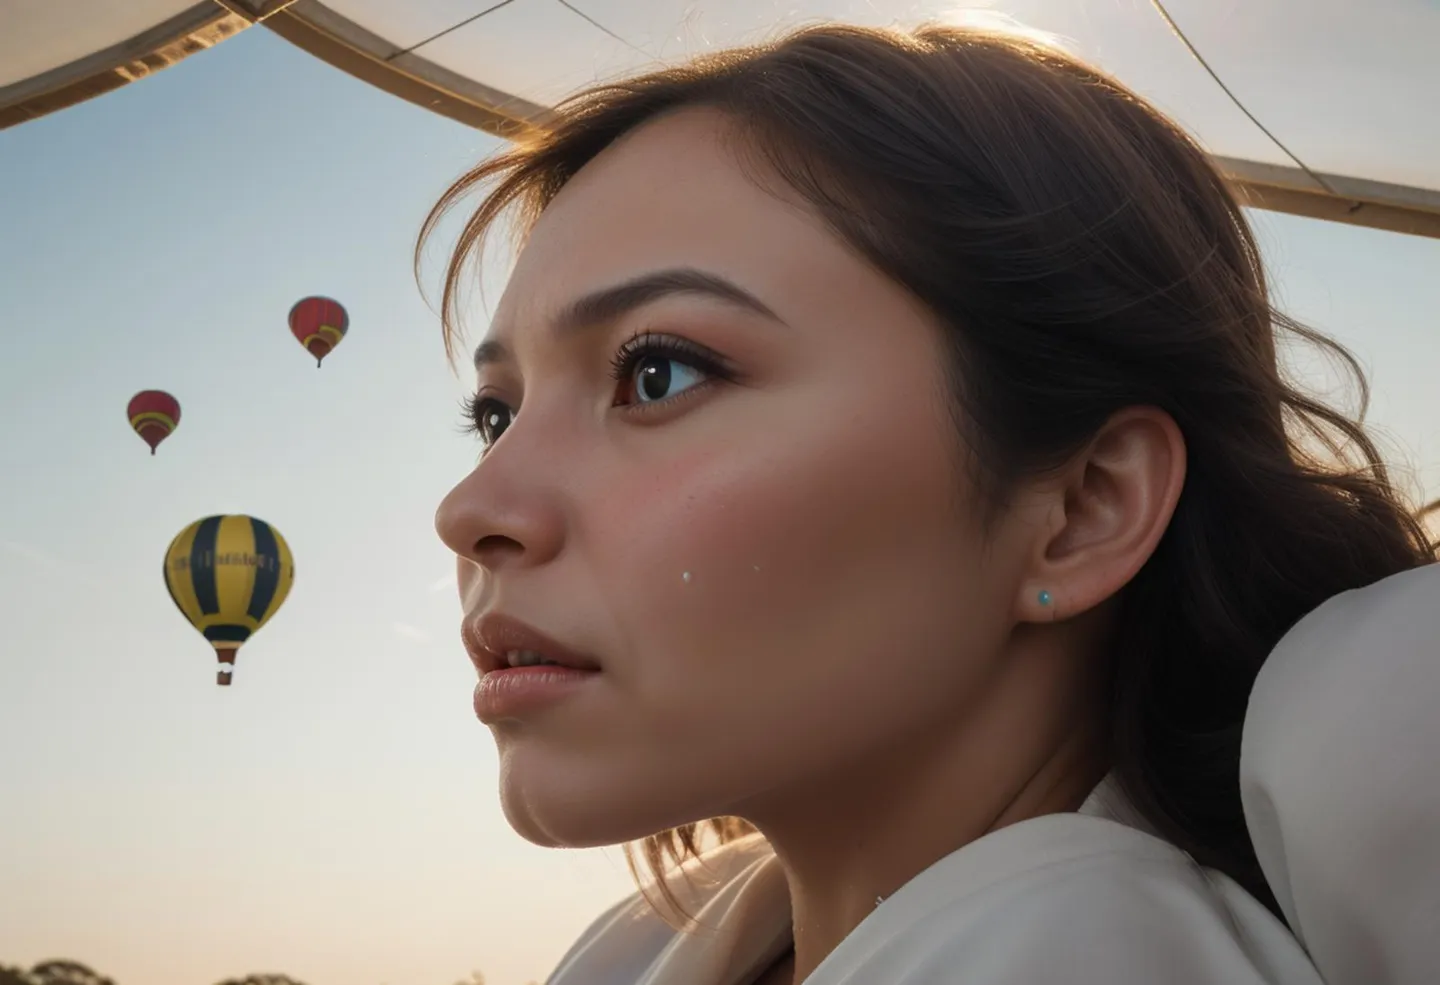 Close-up of a woman watching multiple hot air balloons in the sky, AI generated image using Stable Diffusion.